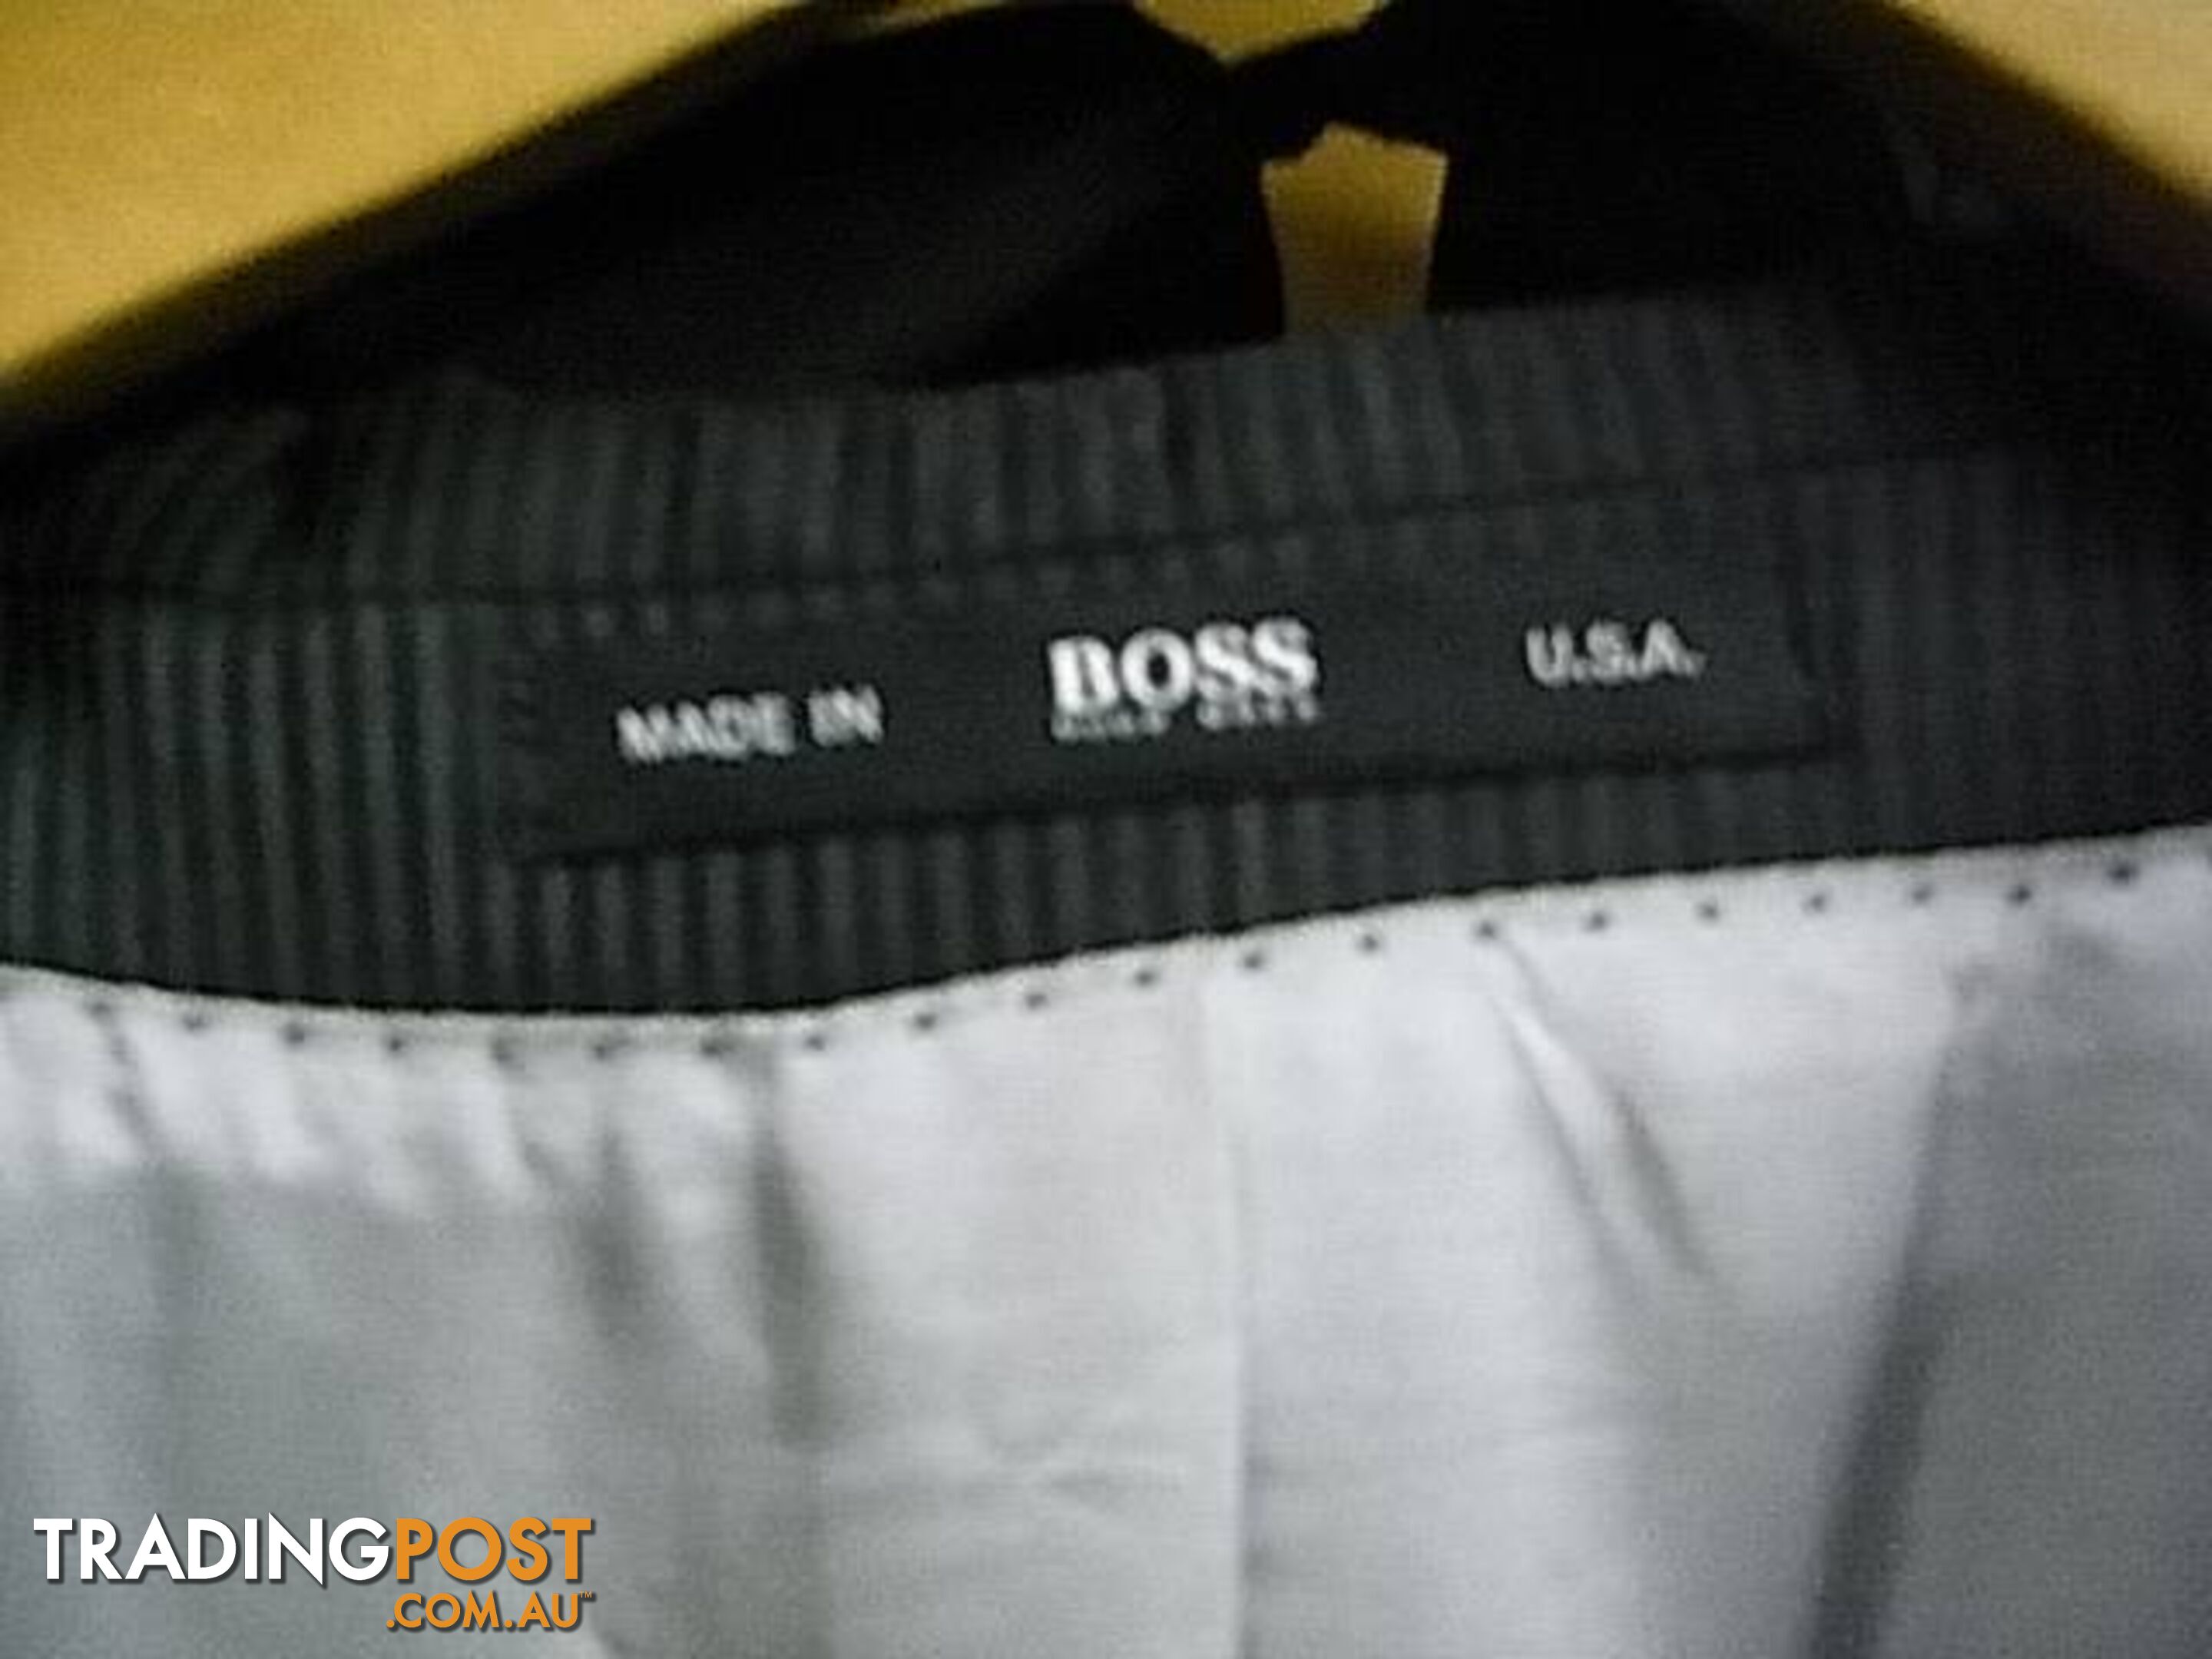 HUGO BOSS SUIT MADE IN USA. JACKET SIZE 44L pants 34 inch EXCEL